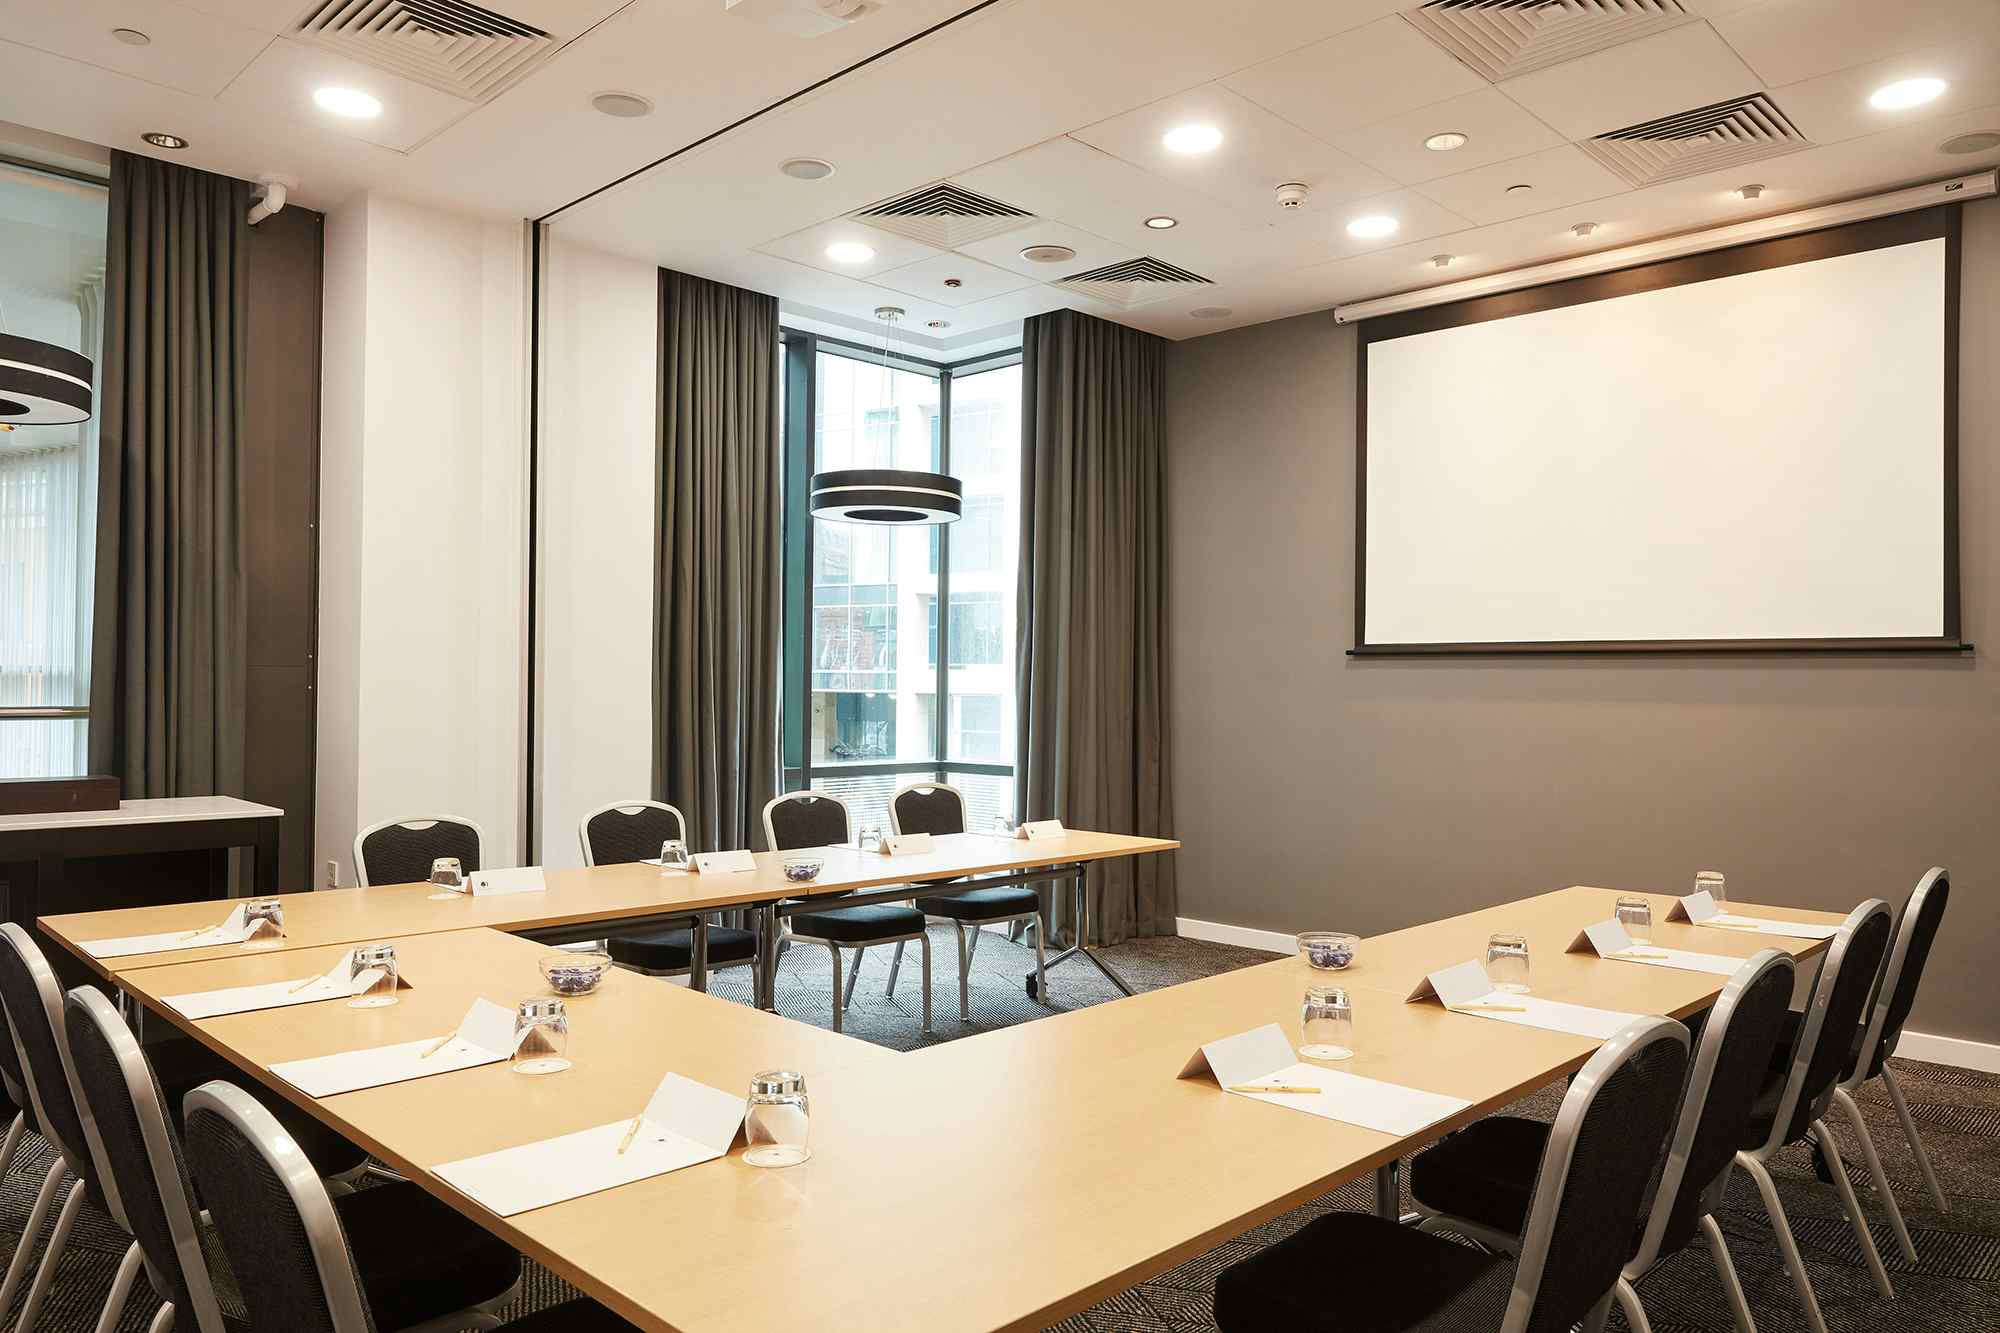 Holyrood & Borthwick, Doubletree By Hilton Hotel Manchester - Piccadilly